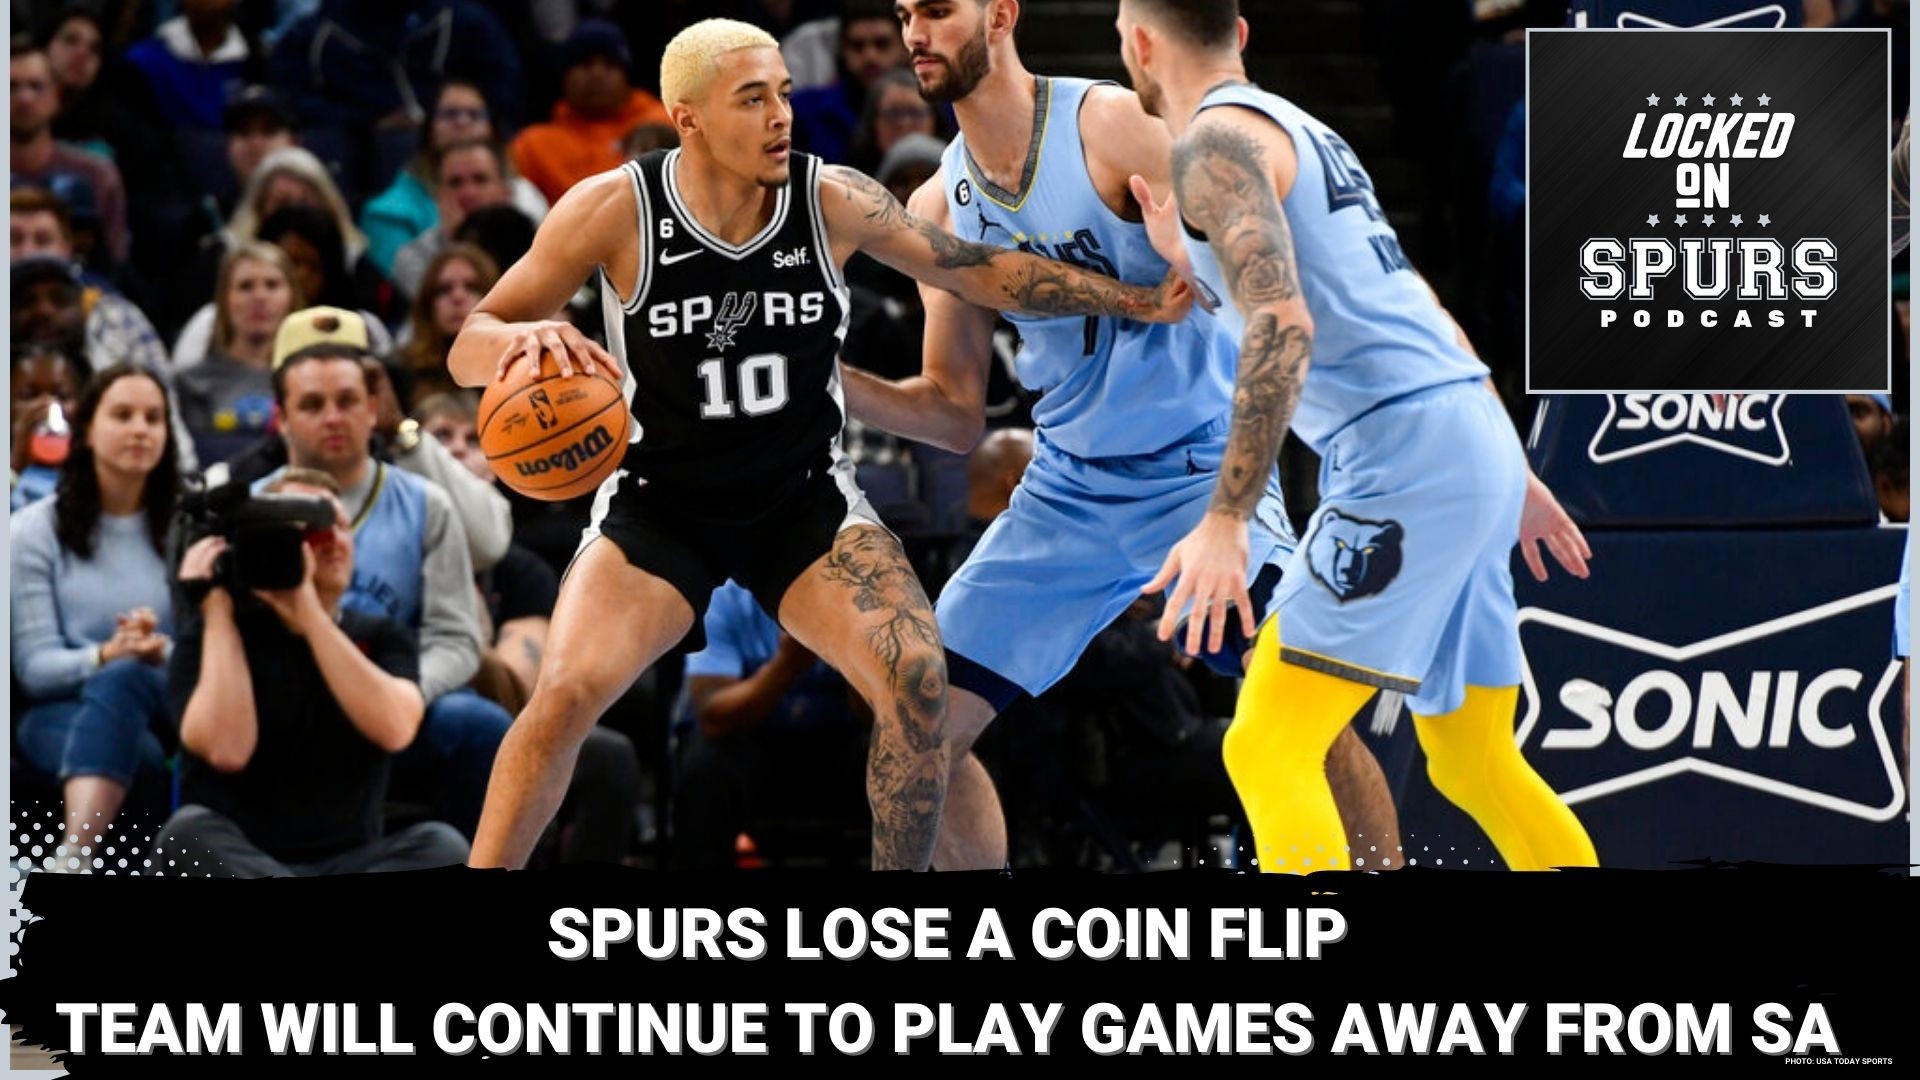 The Spurs will continue to play games away from San Antonio.